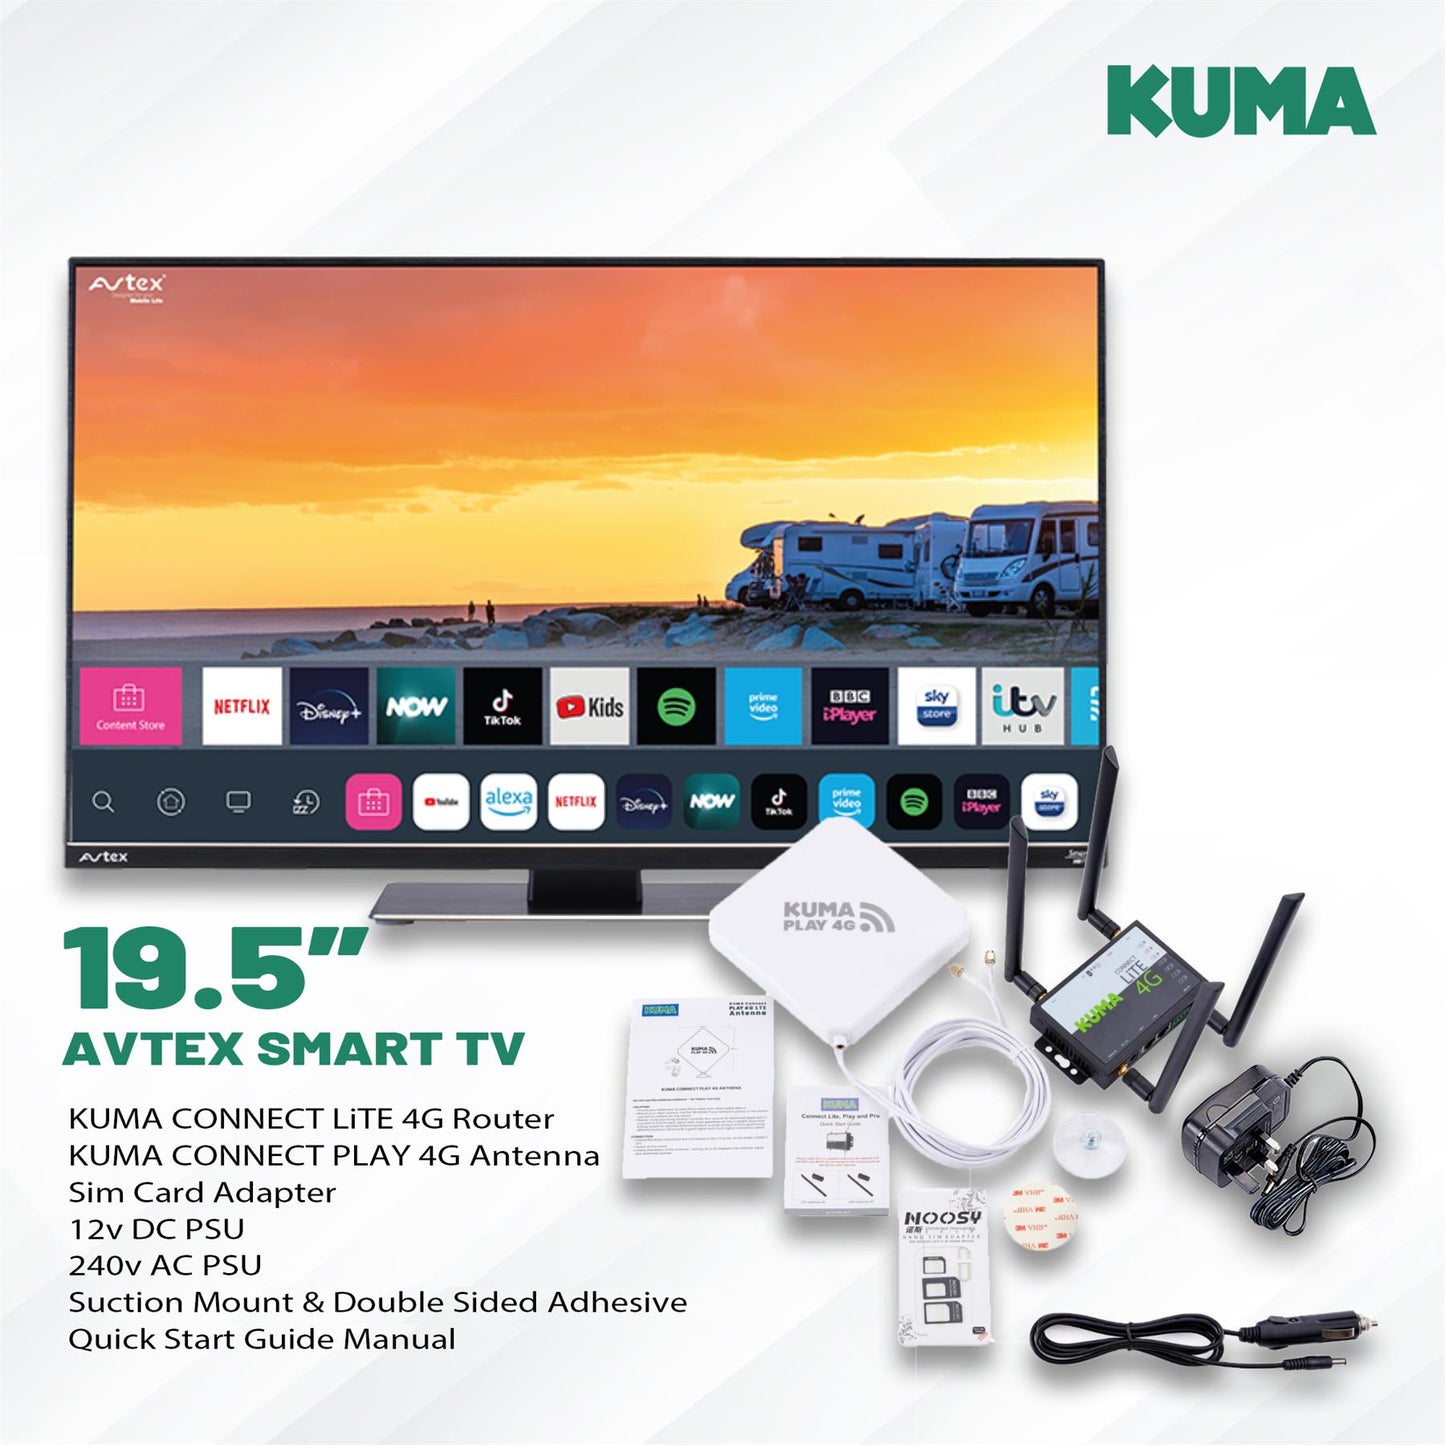 AVTEX W195TS 19.5" Smart TV & KUMA CONNECT PLAY Kit - 12v 19.5 inch Super Slim LED Wifi Bluetooth Full HD Television & SIM Unlocked 4G Router & Indoor Antenna Booster with Netflix Amazon Prime YouTube